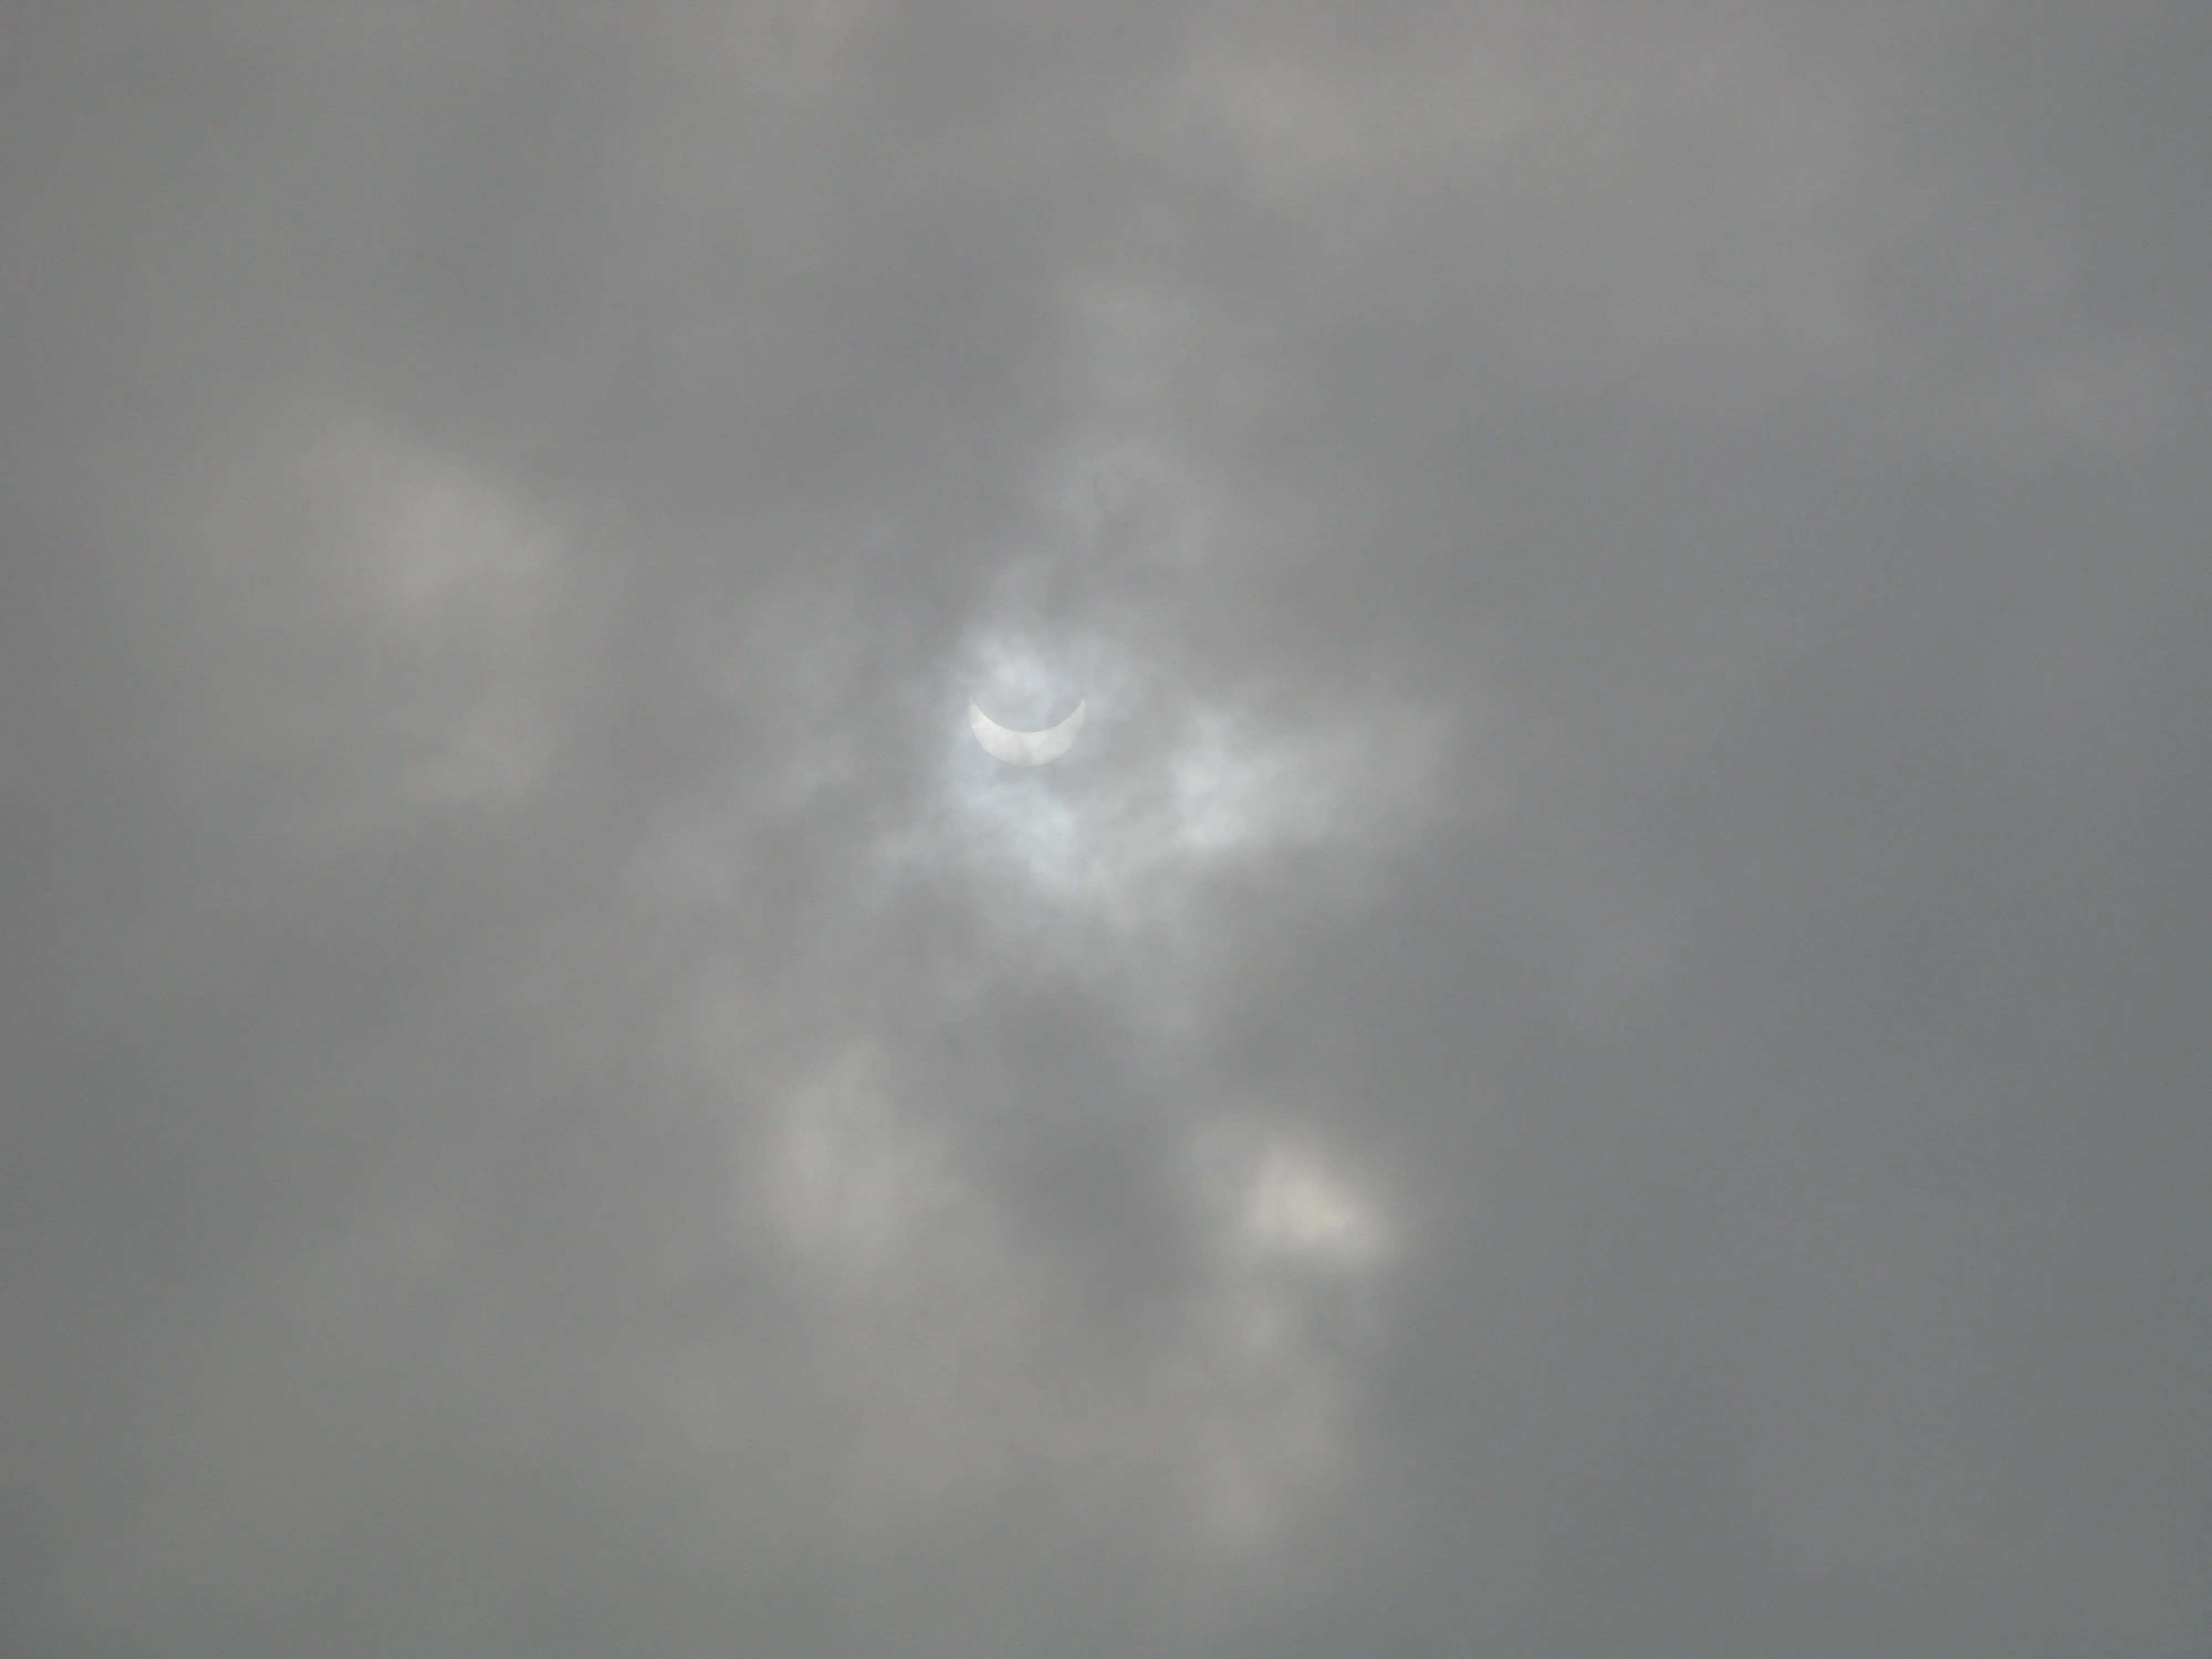 The partially eclipsed Sun can barely be seen as a white crescent through clouds.